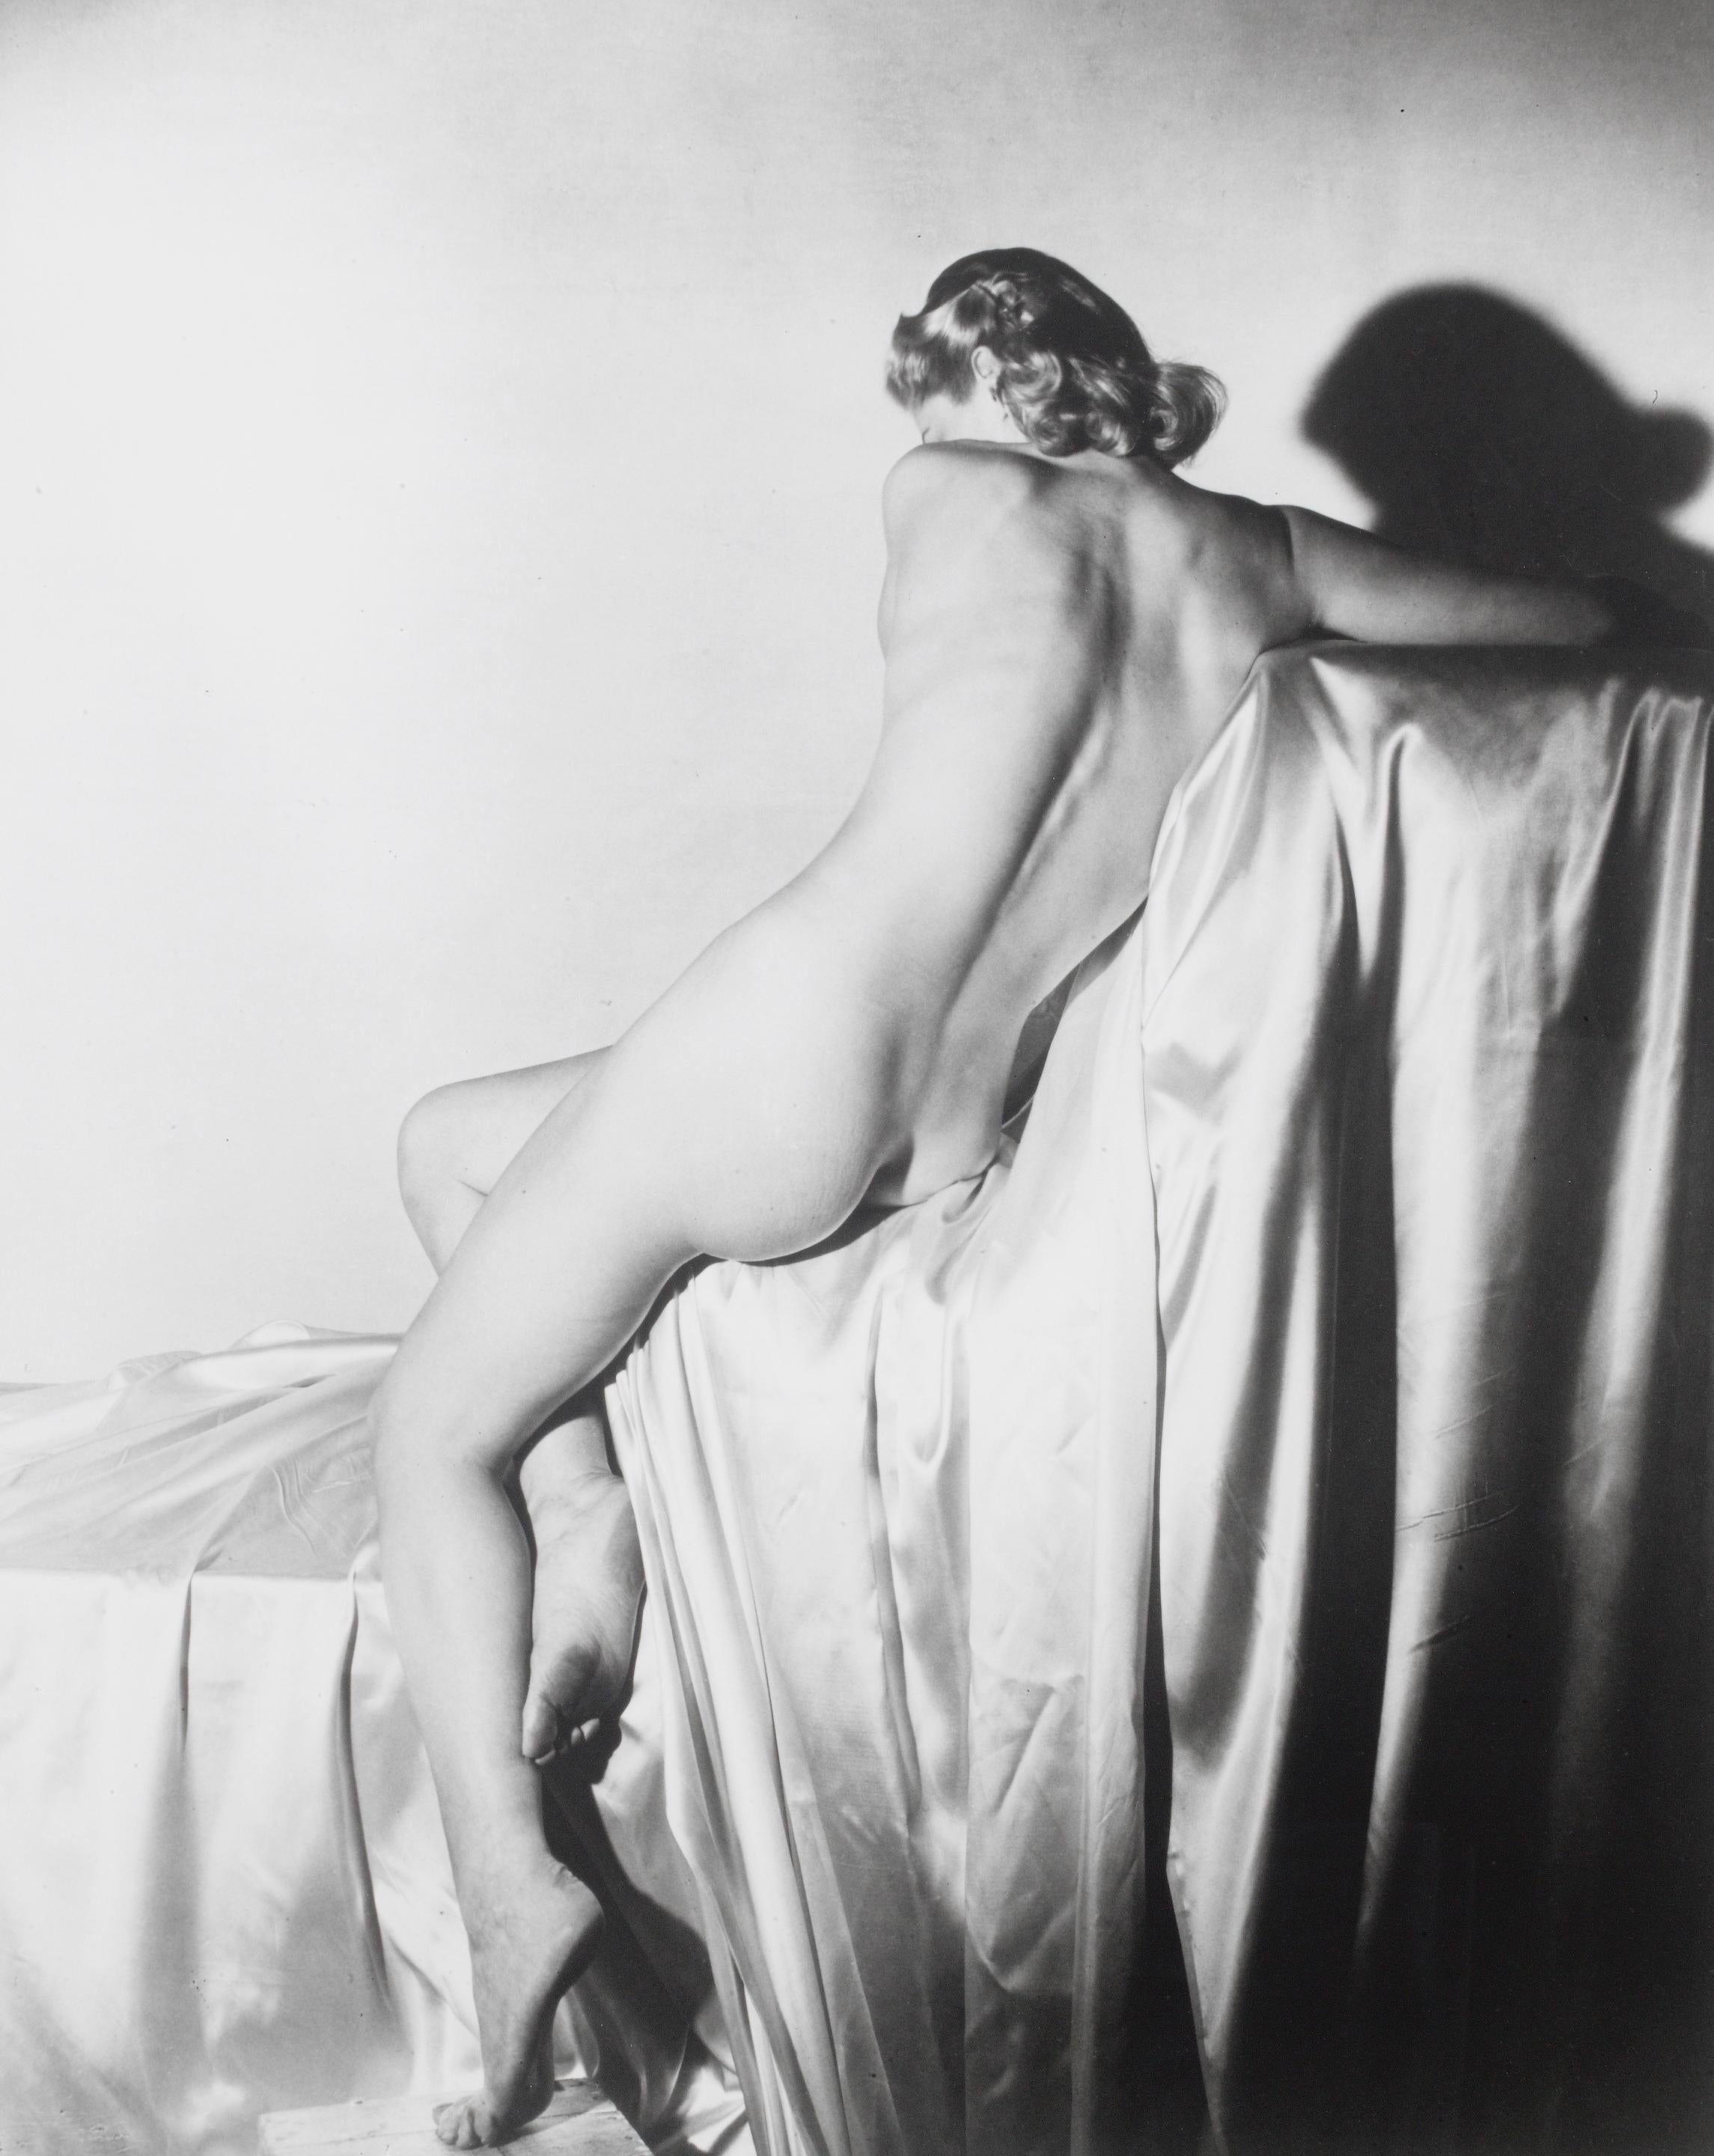 Horst P Horst (1906-1999) (Black and White Photography)
Lisa on Silk, New York, 1940
Signed on reverse
Silver gelatin print
14 x 11 inches

Horst was a perfectionist who raised the standards of fashion photography, and indeed helped to define it.